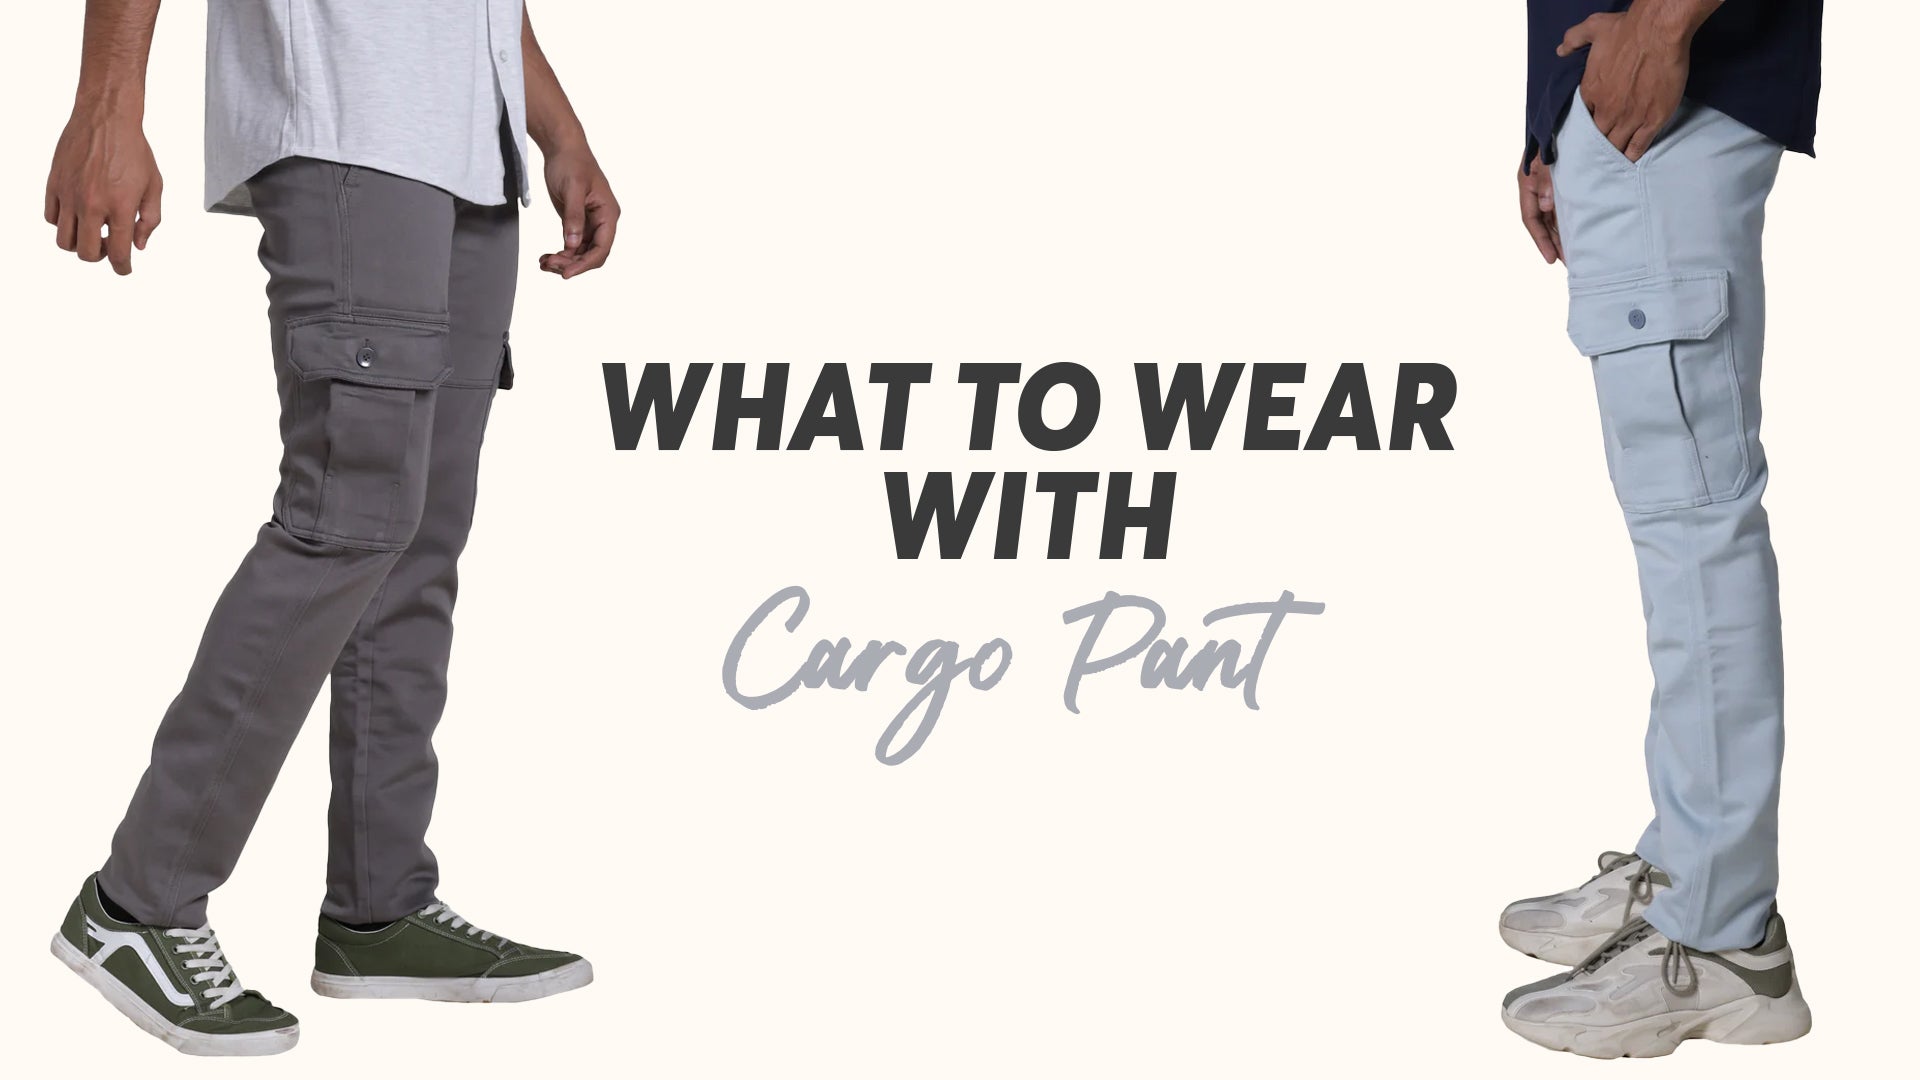 5 Ways to Style Cargo Pants (Dapper, Casual, & Street) | Outfit Inspiration  | Men's Fashion - YouTube